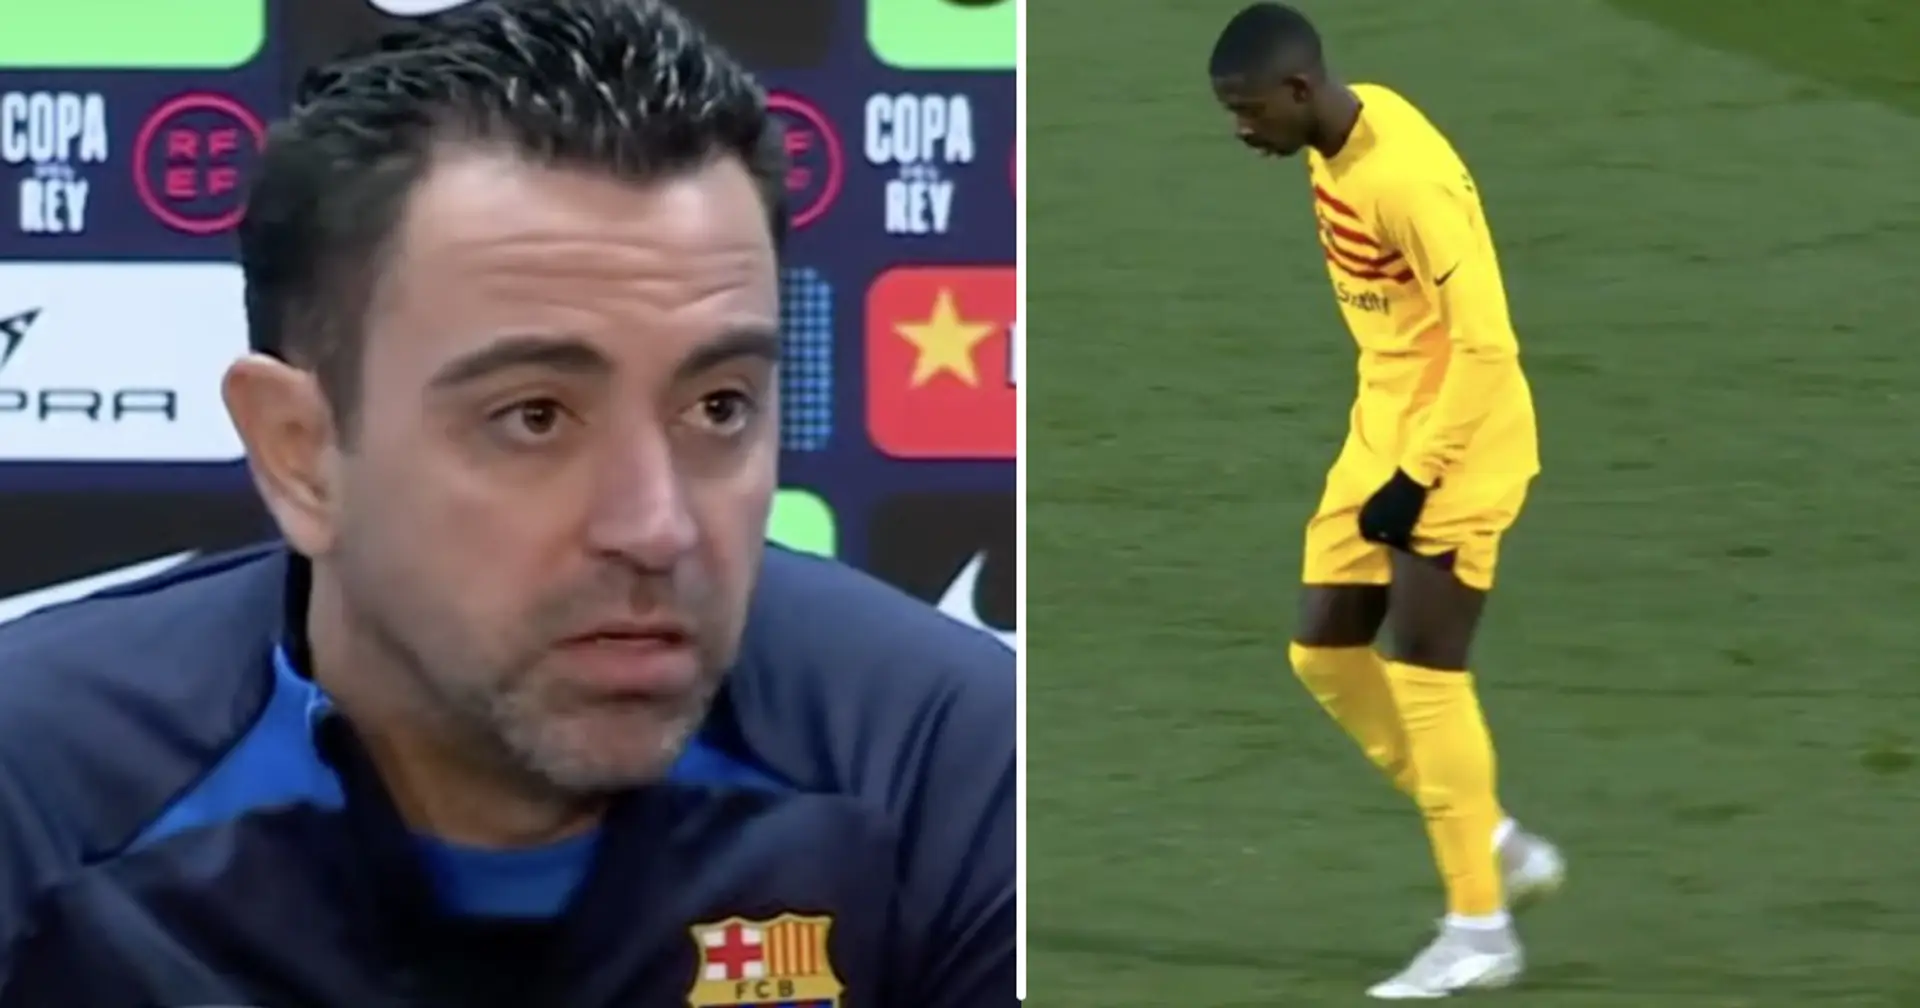 Reporter provides injury update on Dembele -- it's quite worrying